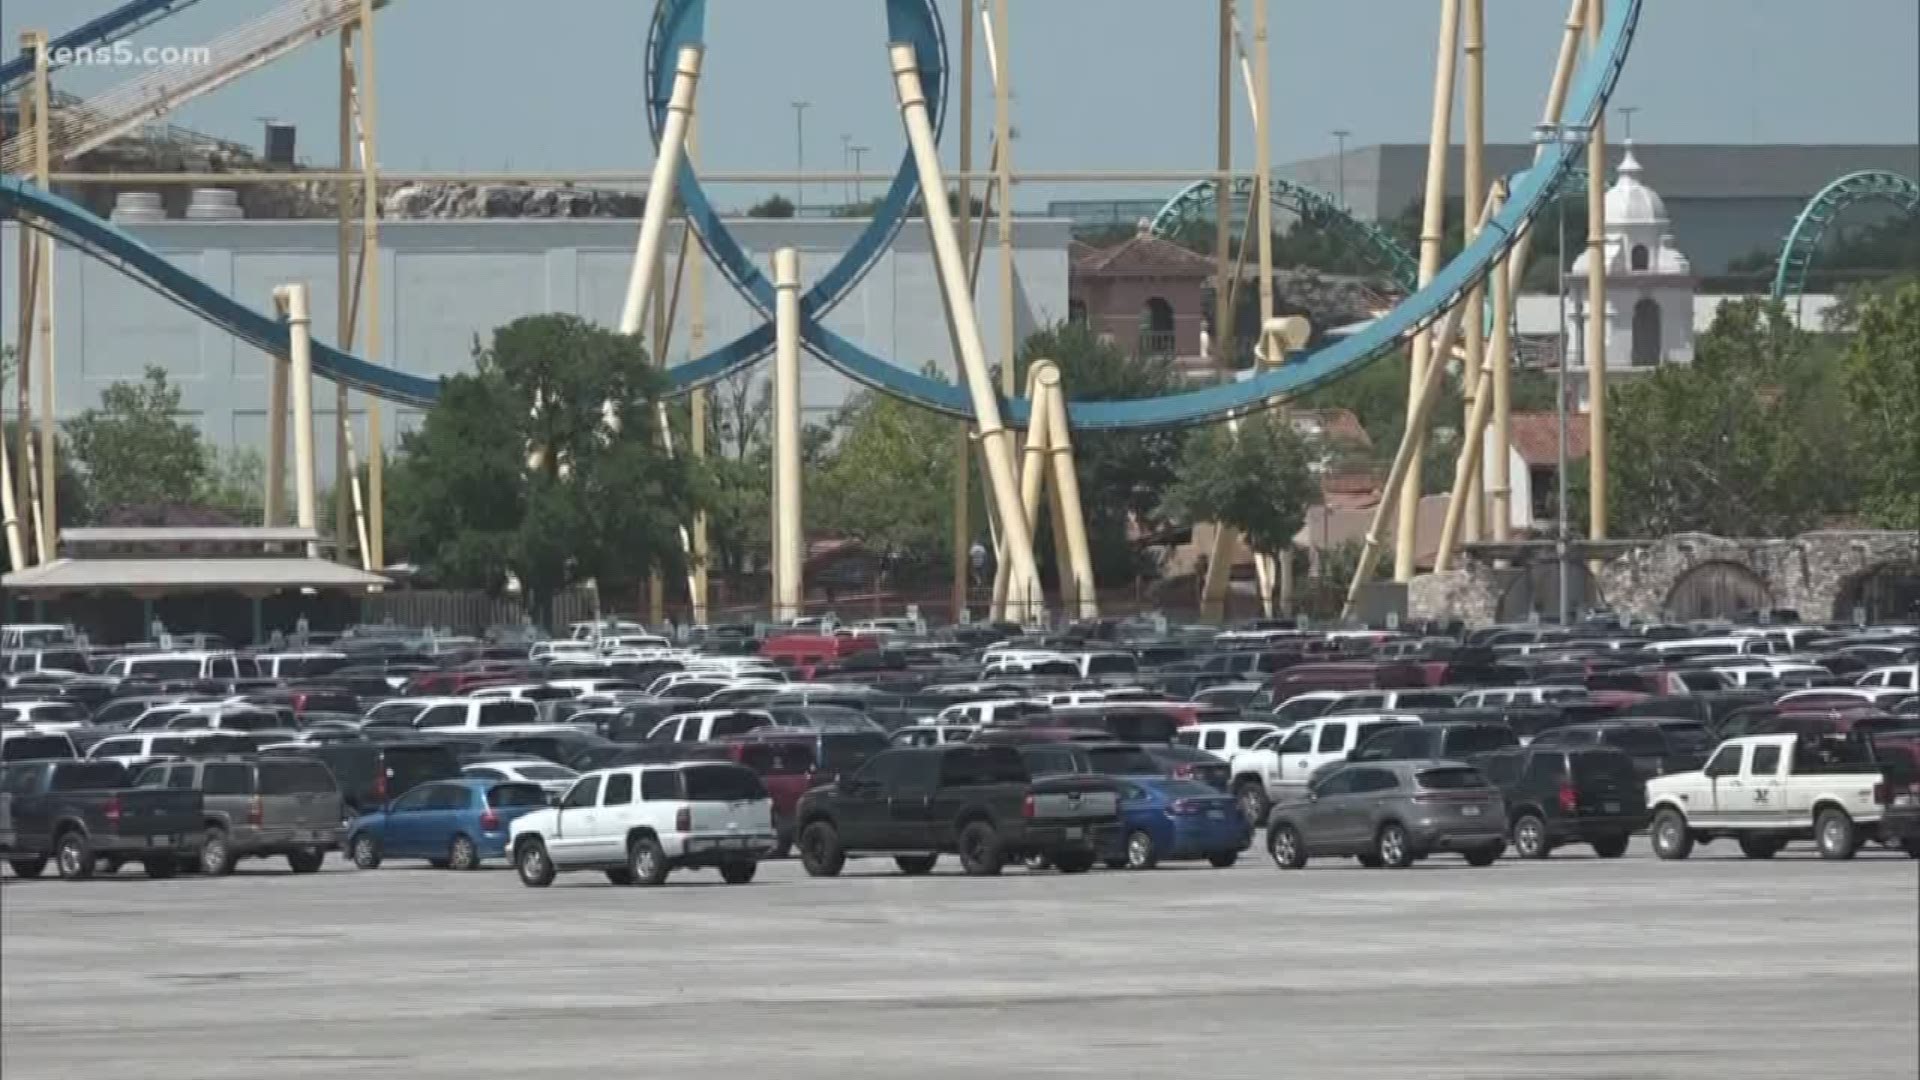 Eight vehicles have been stolen from the Fiesta Texas parking lot since January and now some of them have been found by Border Patrol agents.